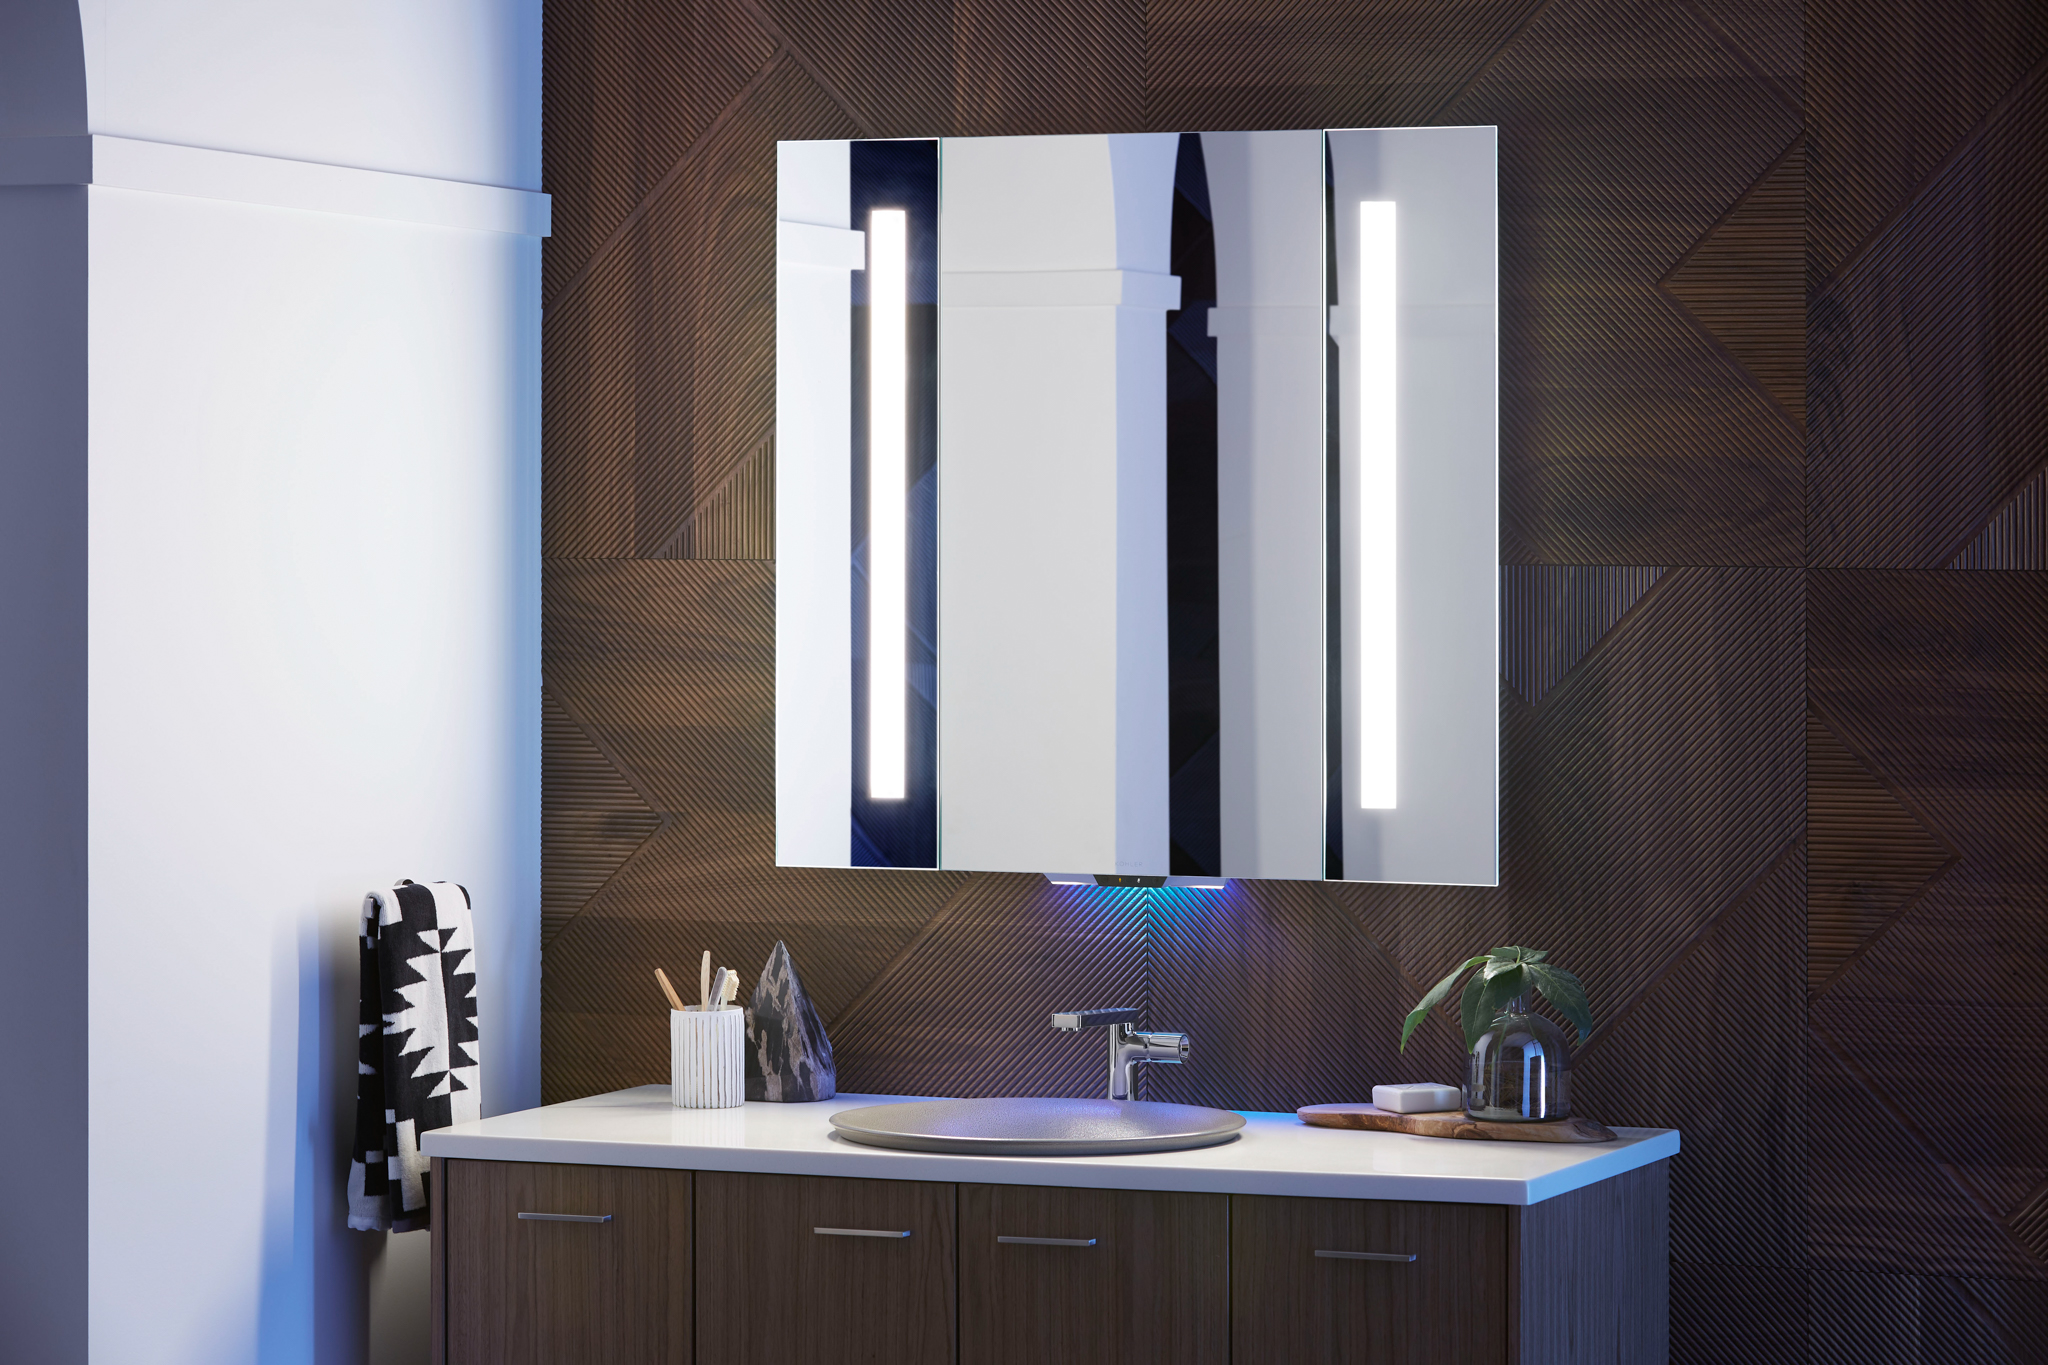 The Kohler Konnect line includes the voice-activated Verdera Voice Lighted Mirror. Image: Kohler.